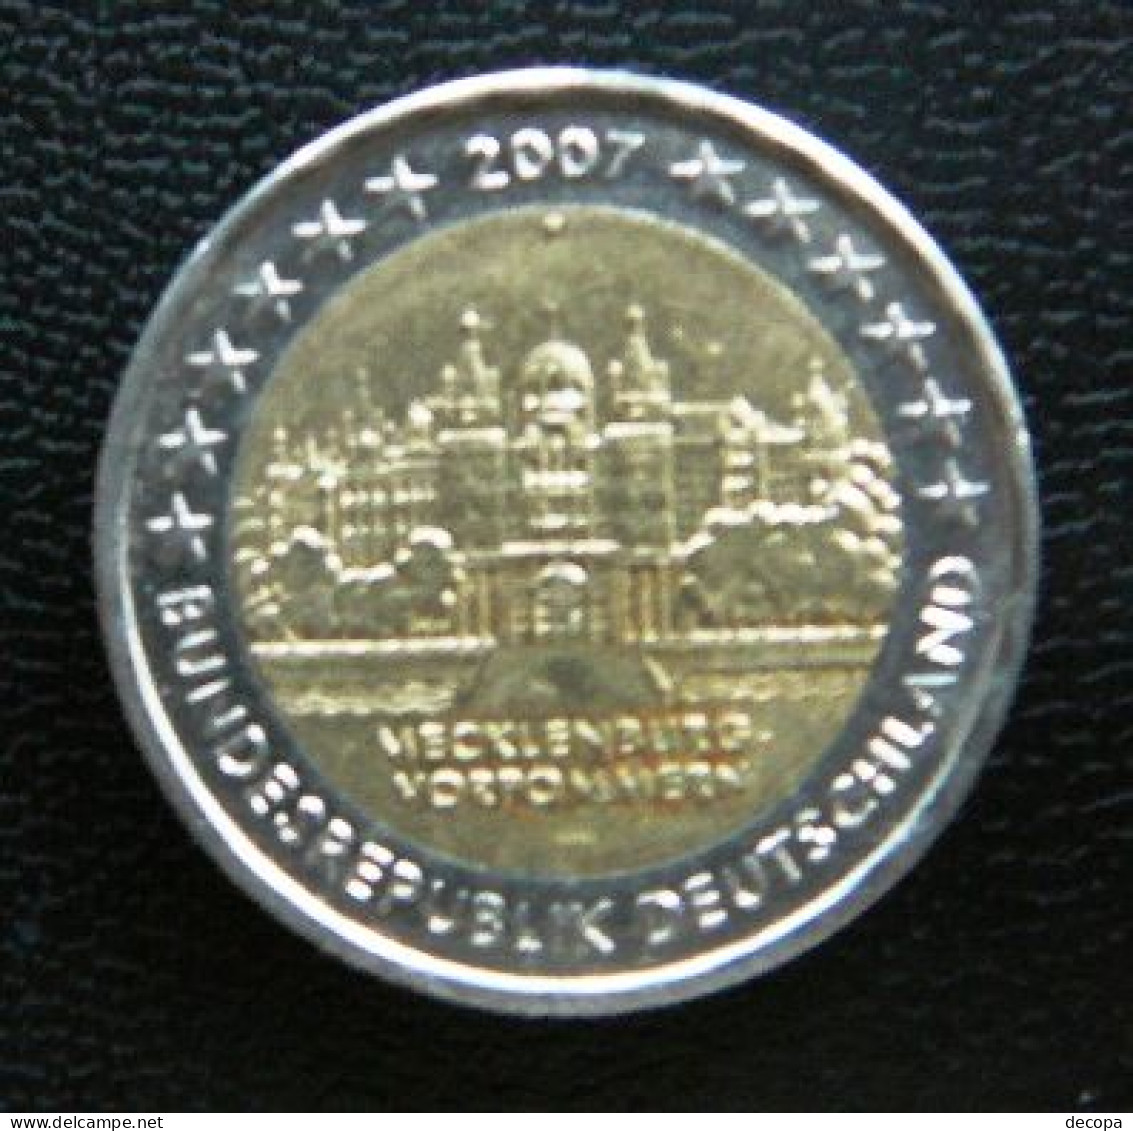 Germany - Allemagne - Duitsland   2 EURO 2007 F     Speciale Uitgave - Commemorative - Alemania